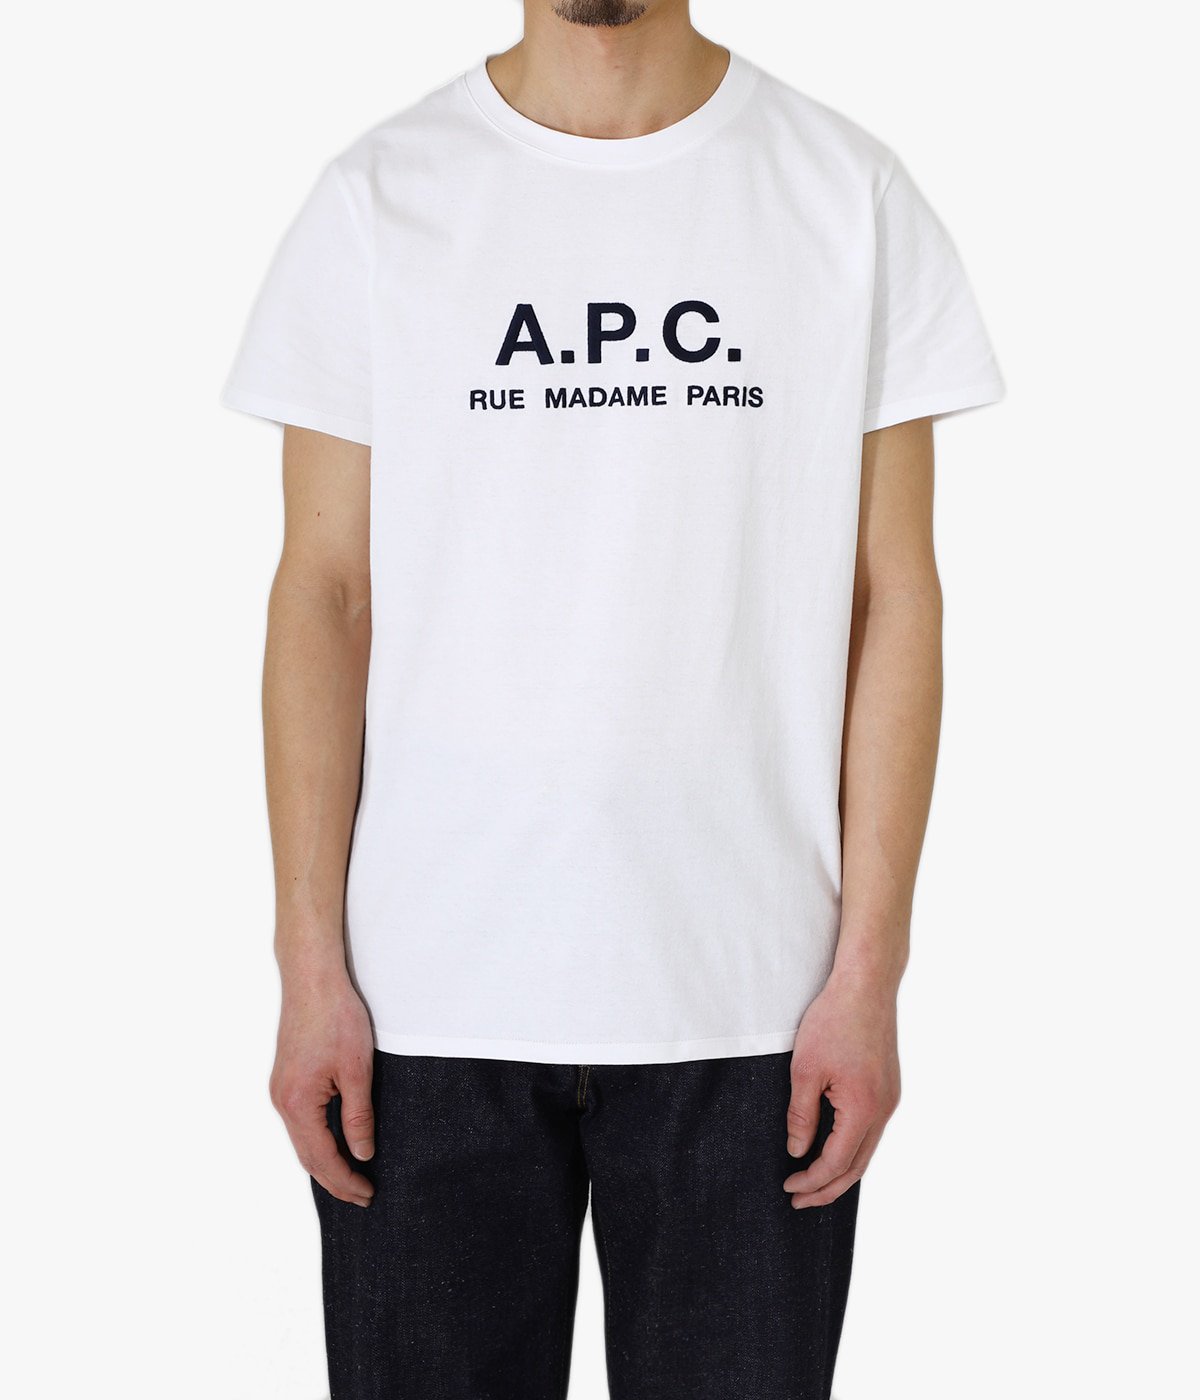 T-SHIRT RUE MADAME H | A.P.C.(アーぺーセー) / トップス カットソー ...